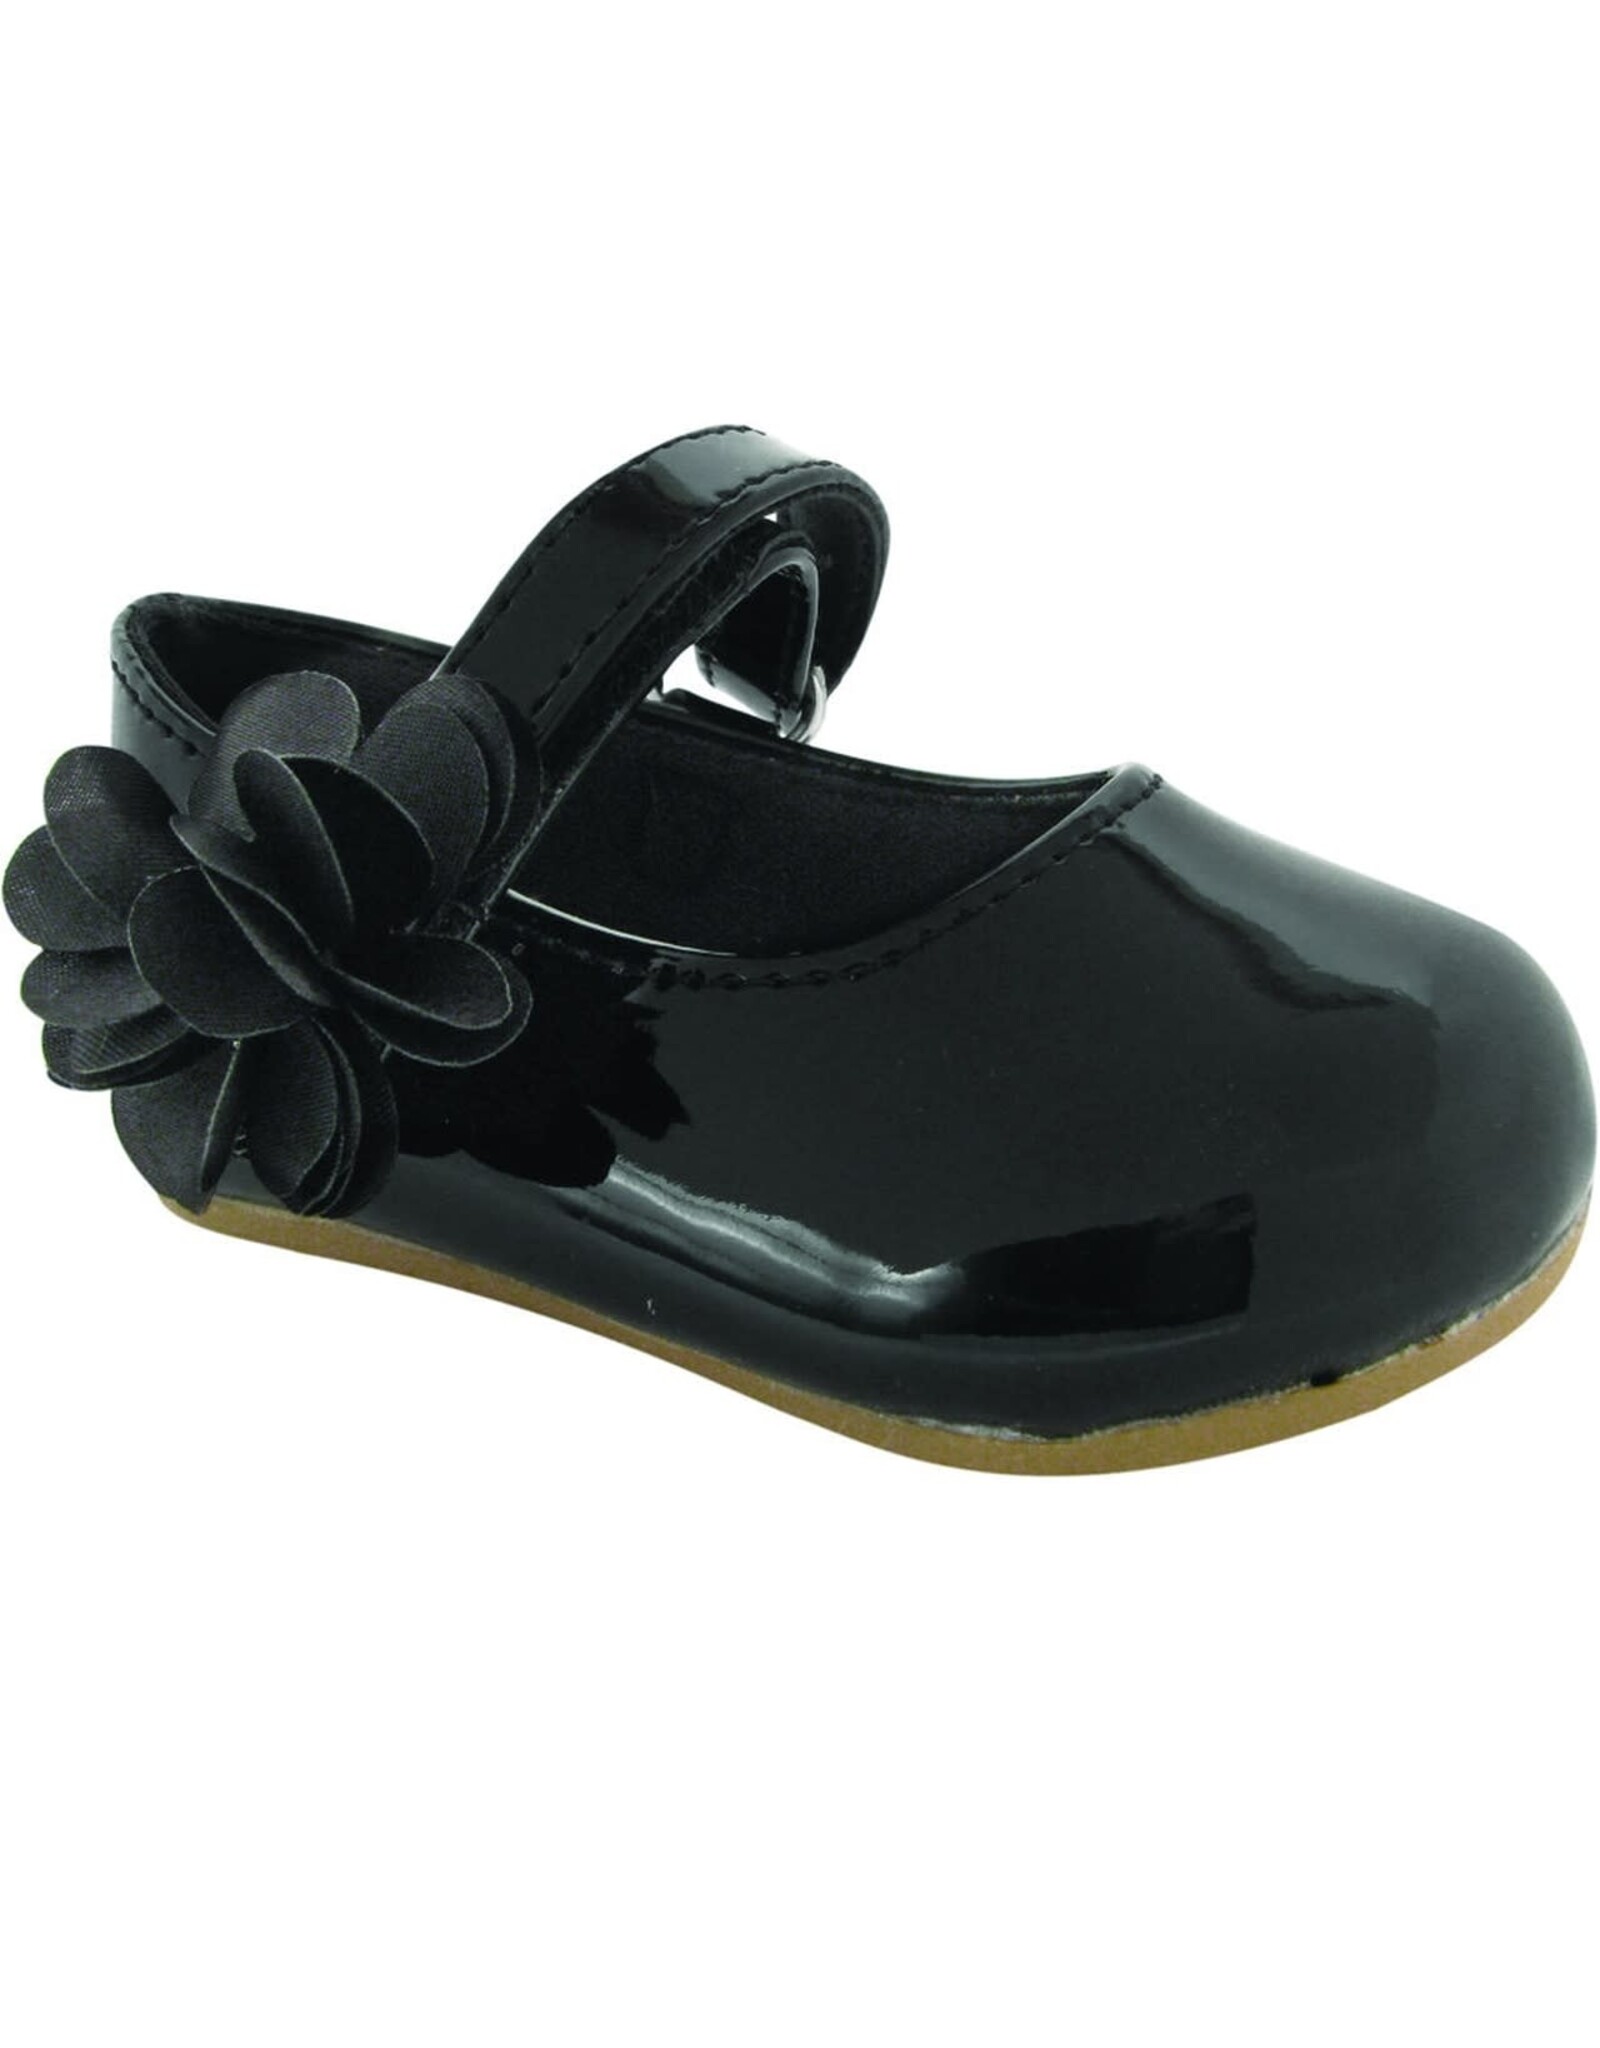 Baby Deer Linley Mary Jane Dress Flats with Flower